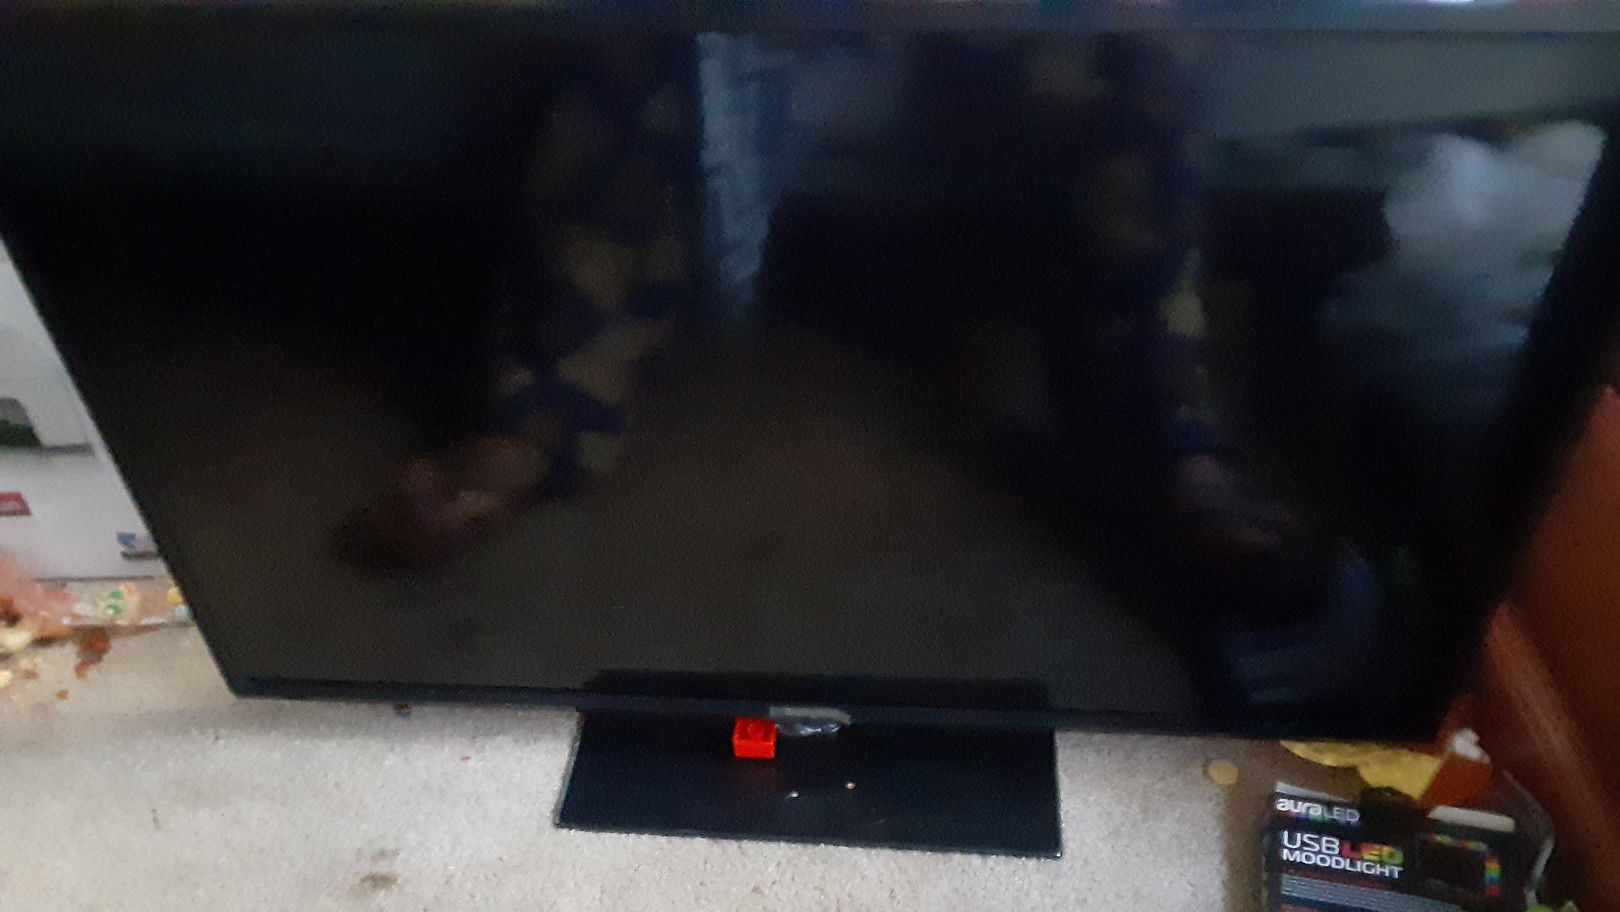 42in TV sale or trade